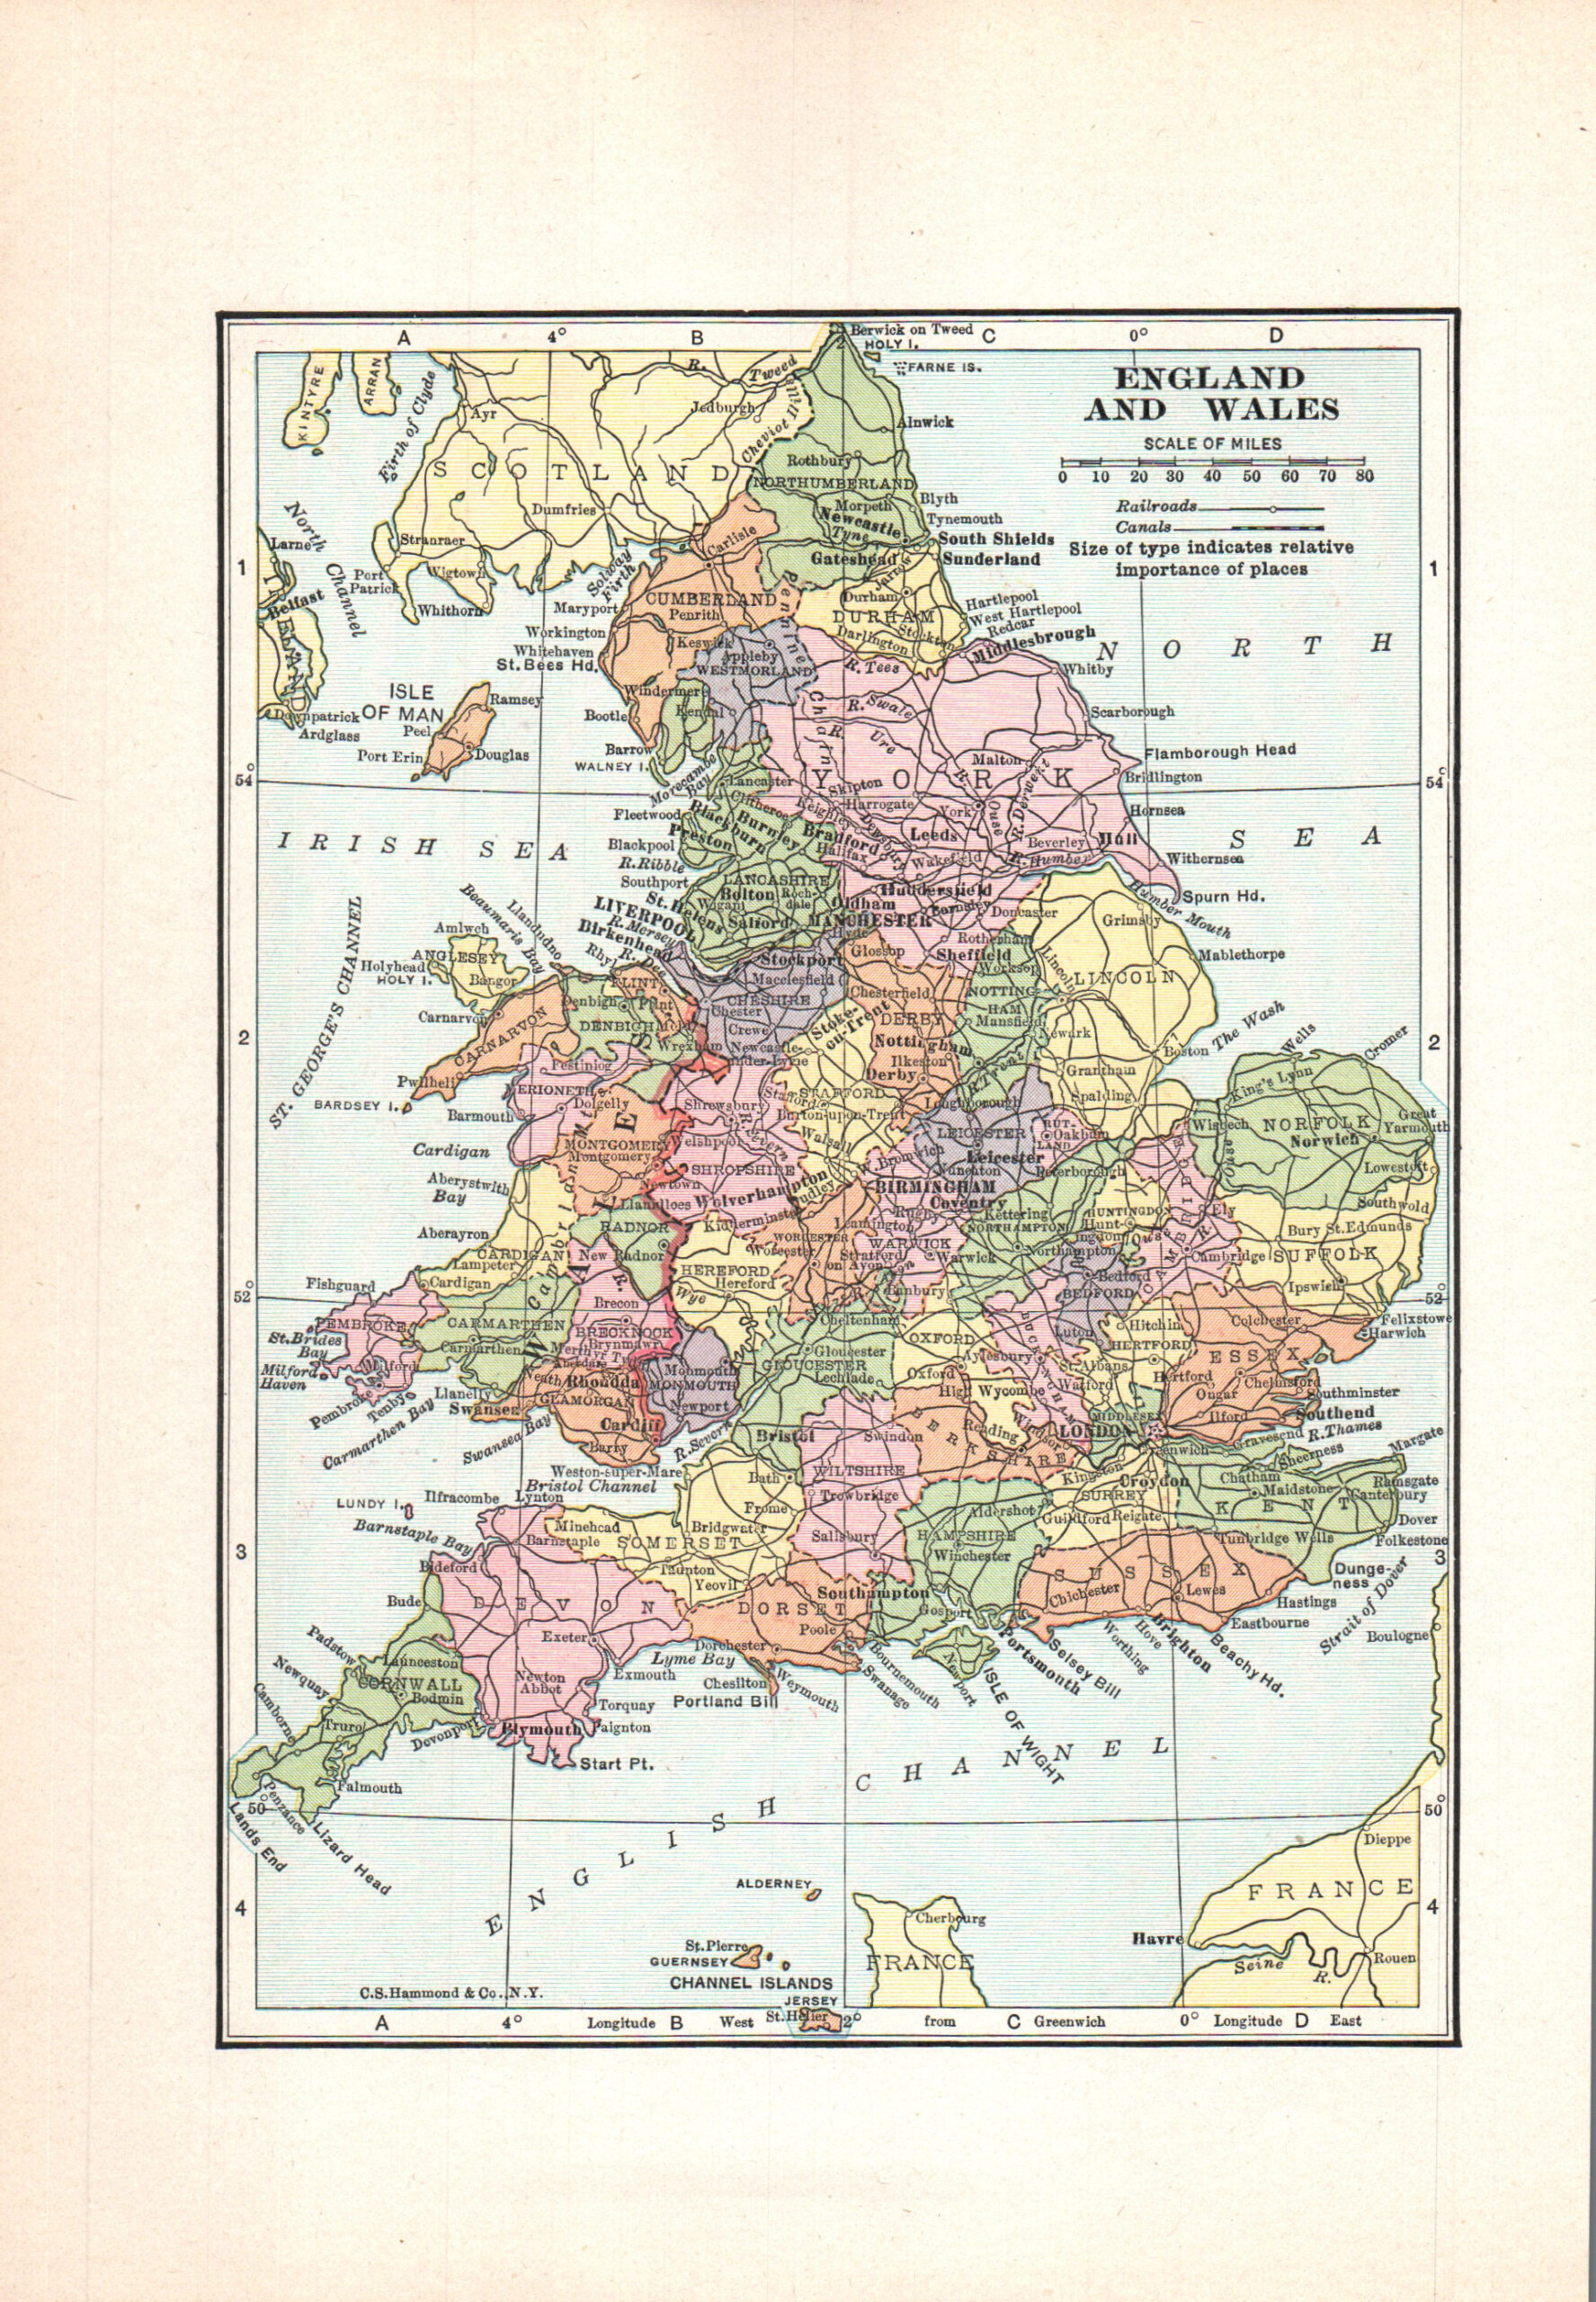 1937 Vintage Atlas Map Page - England and Wales map on one side and British I...